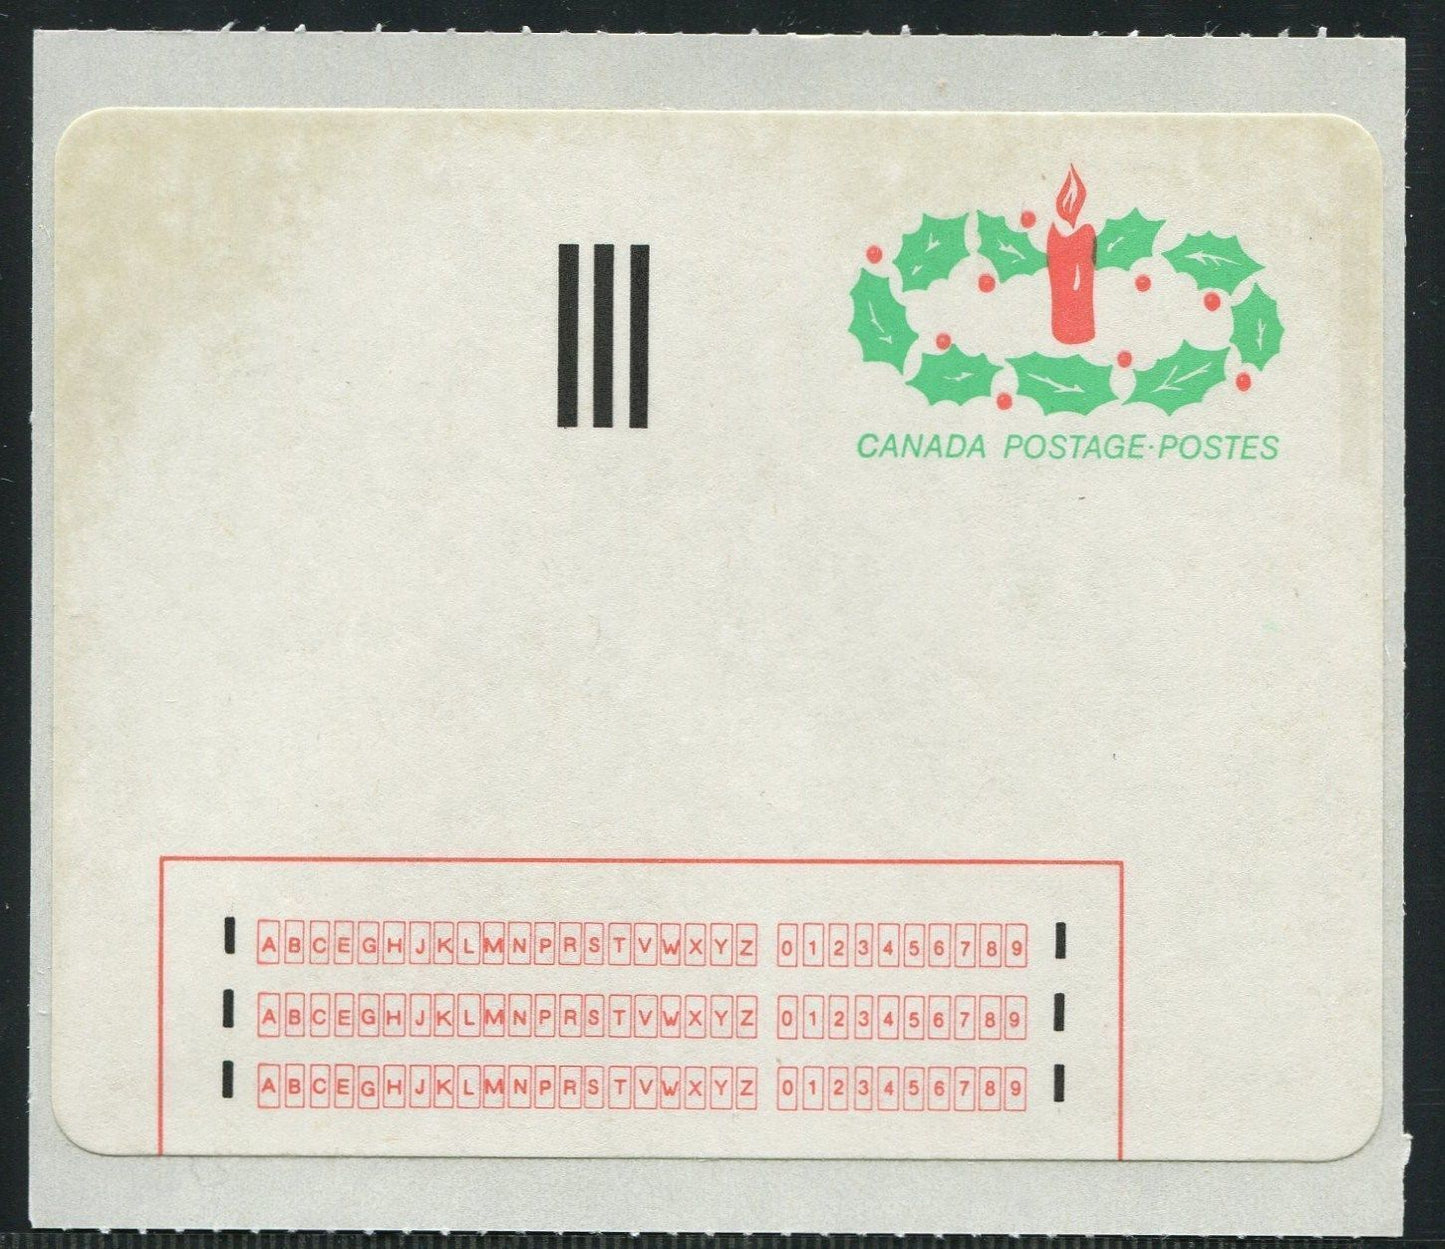 Canada #1ST 1983 Stick N Tic Label - VF Mint on Backing Paper Brixton Chrome 